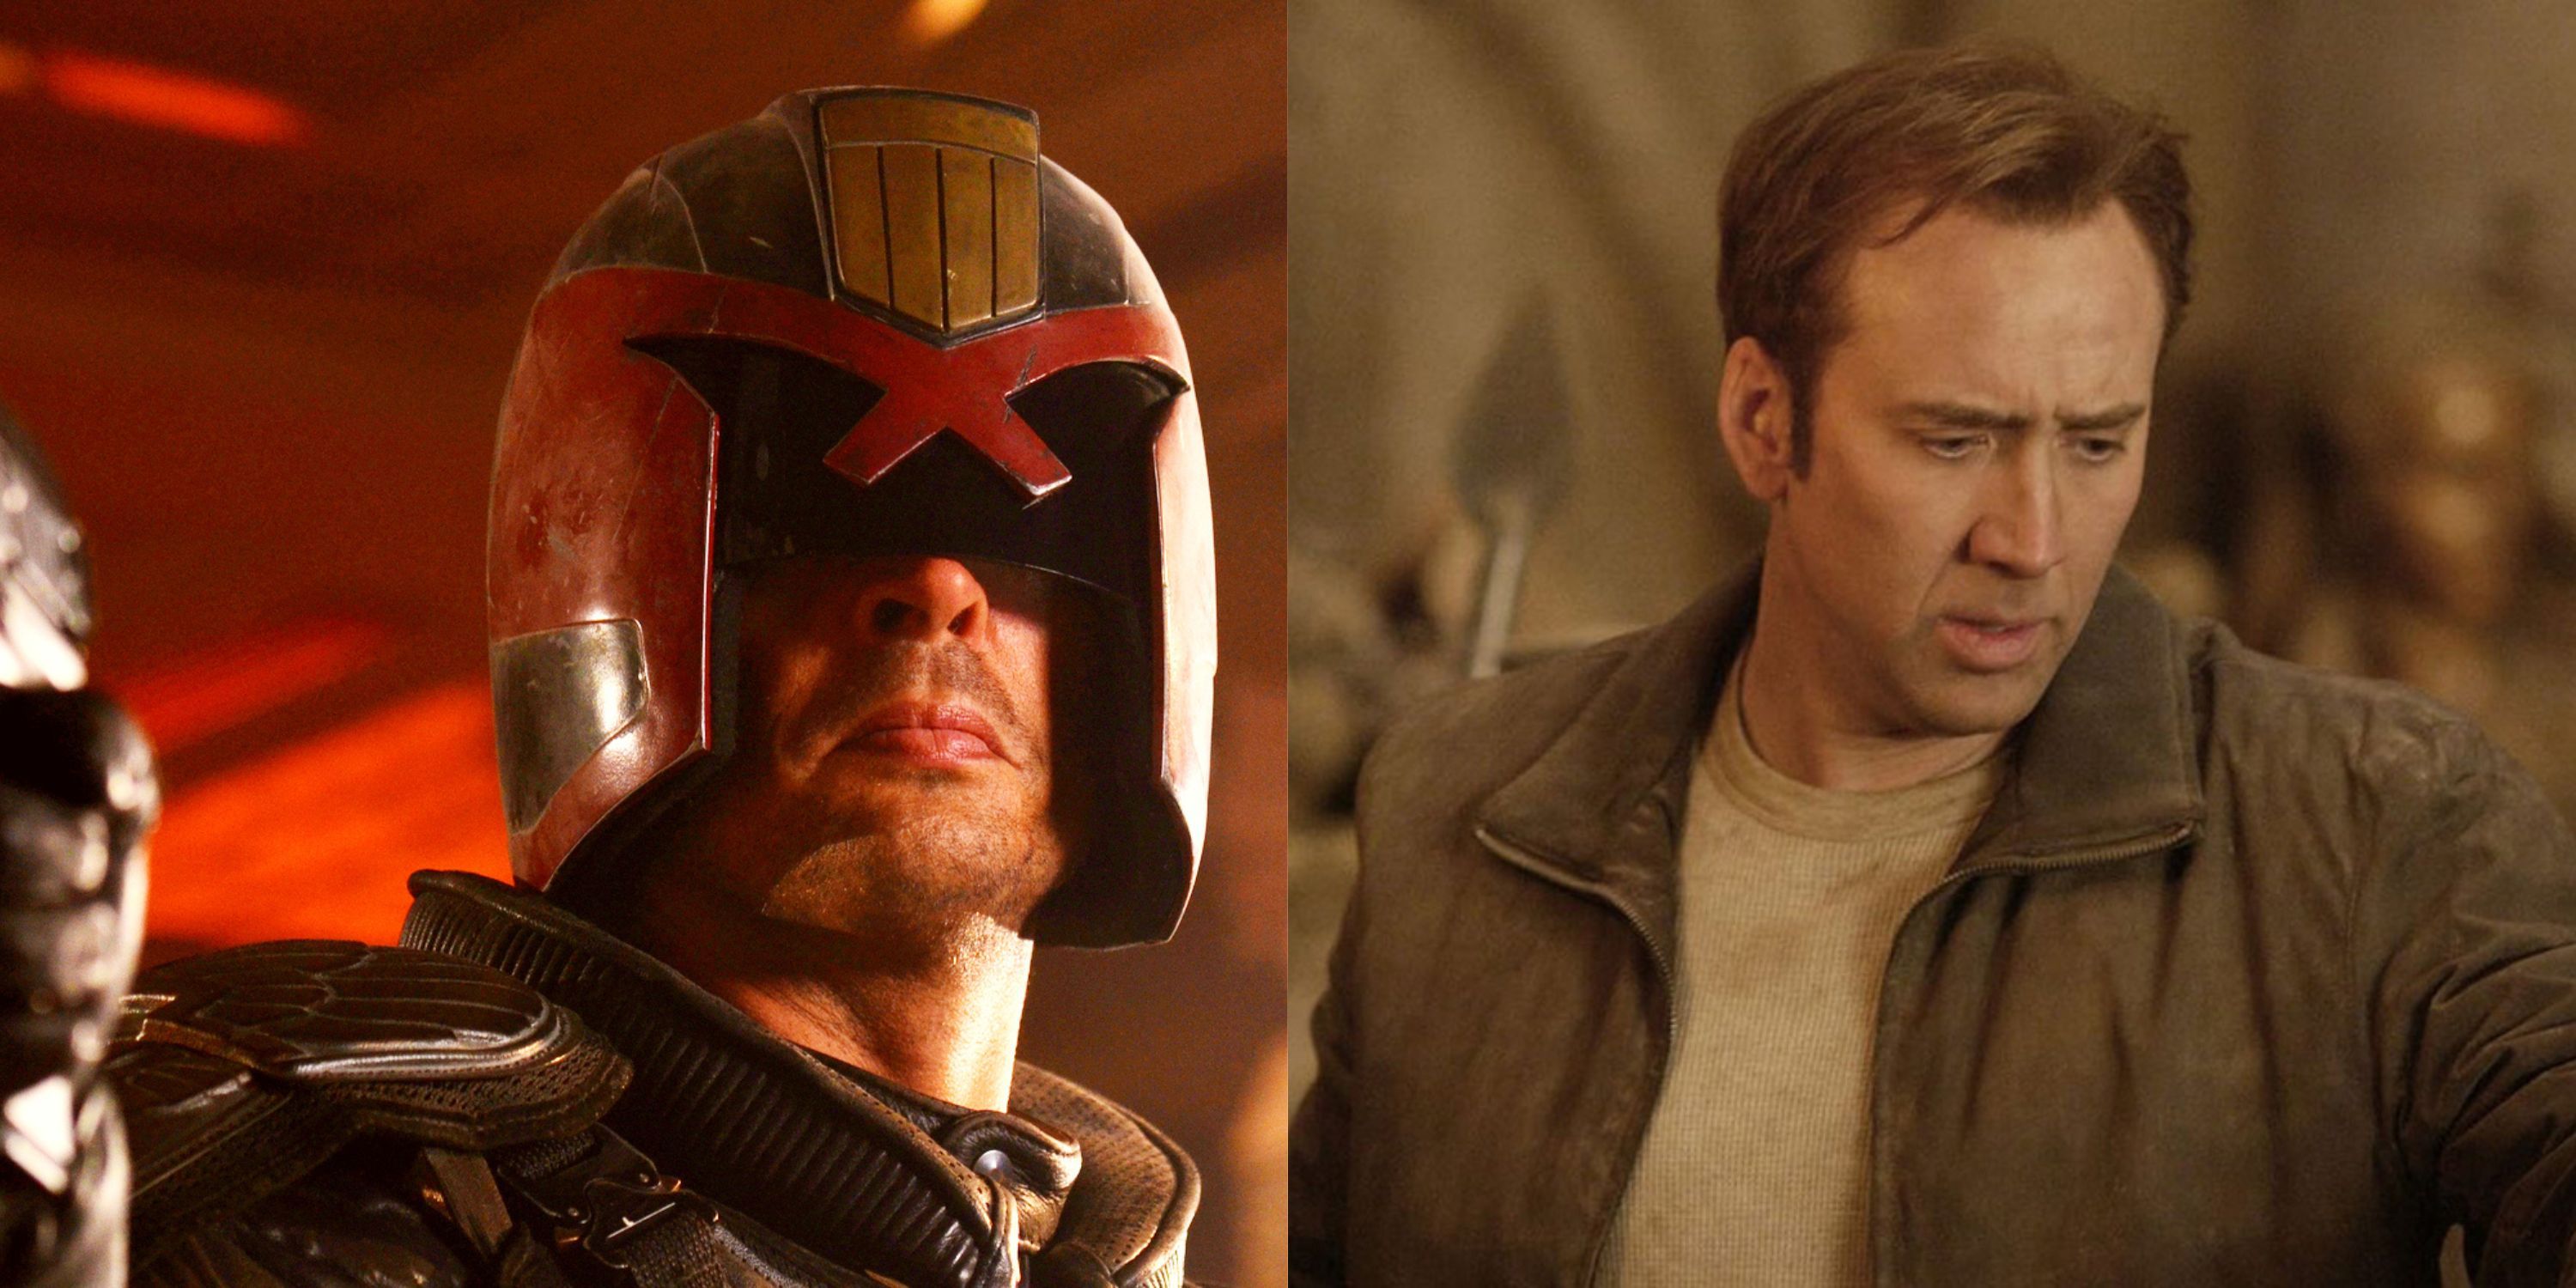 Featured image showing Karl Urban in Dredd and Nicolas Cage in National Treasure